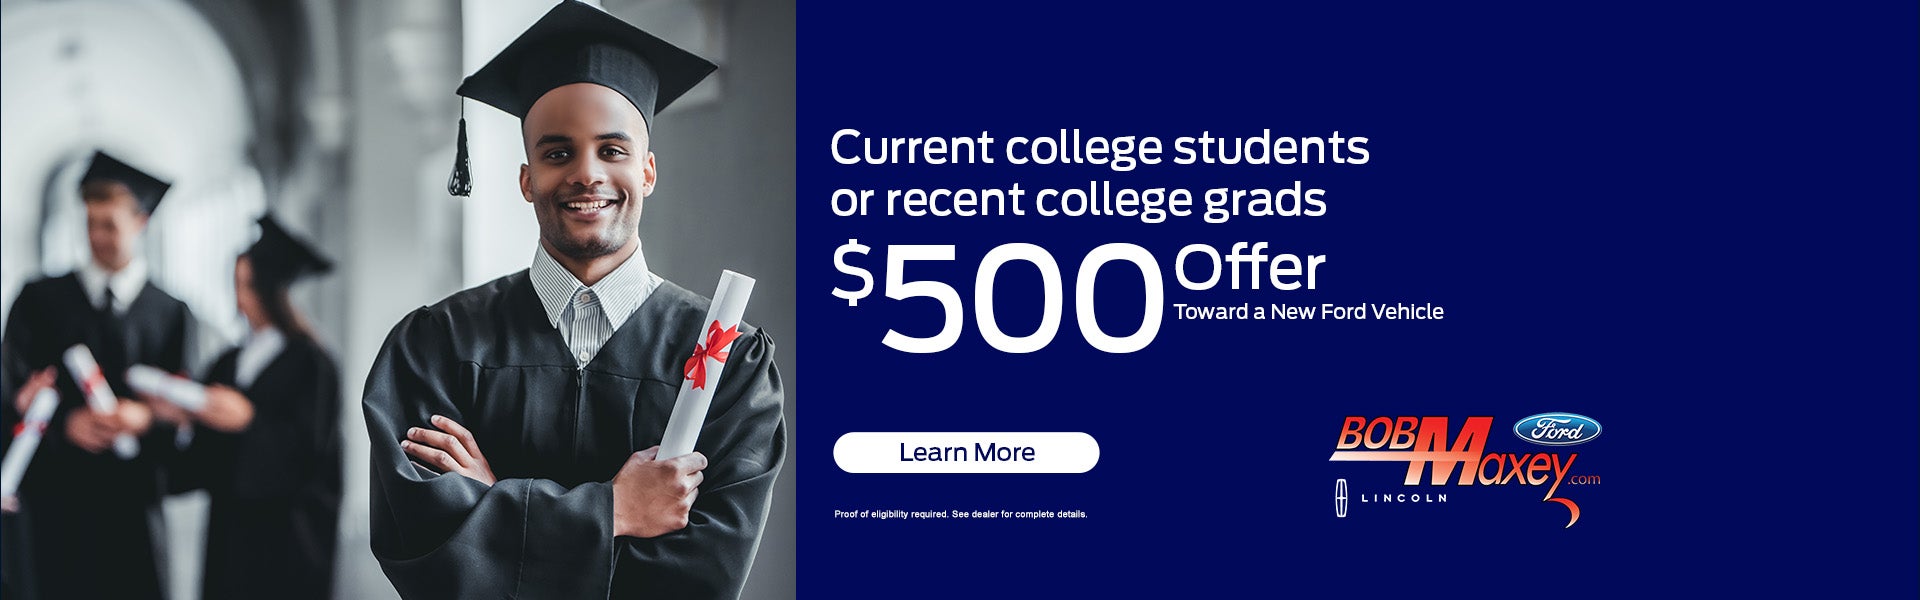 College Student Offer